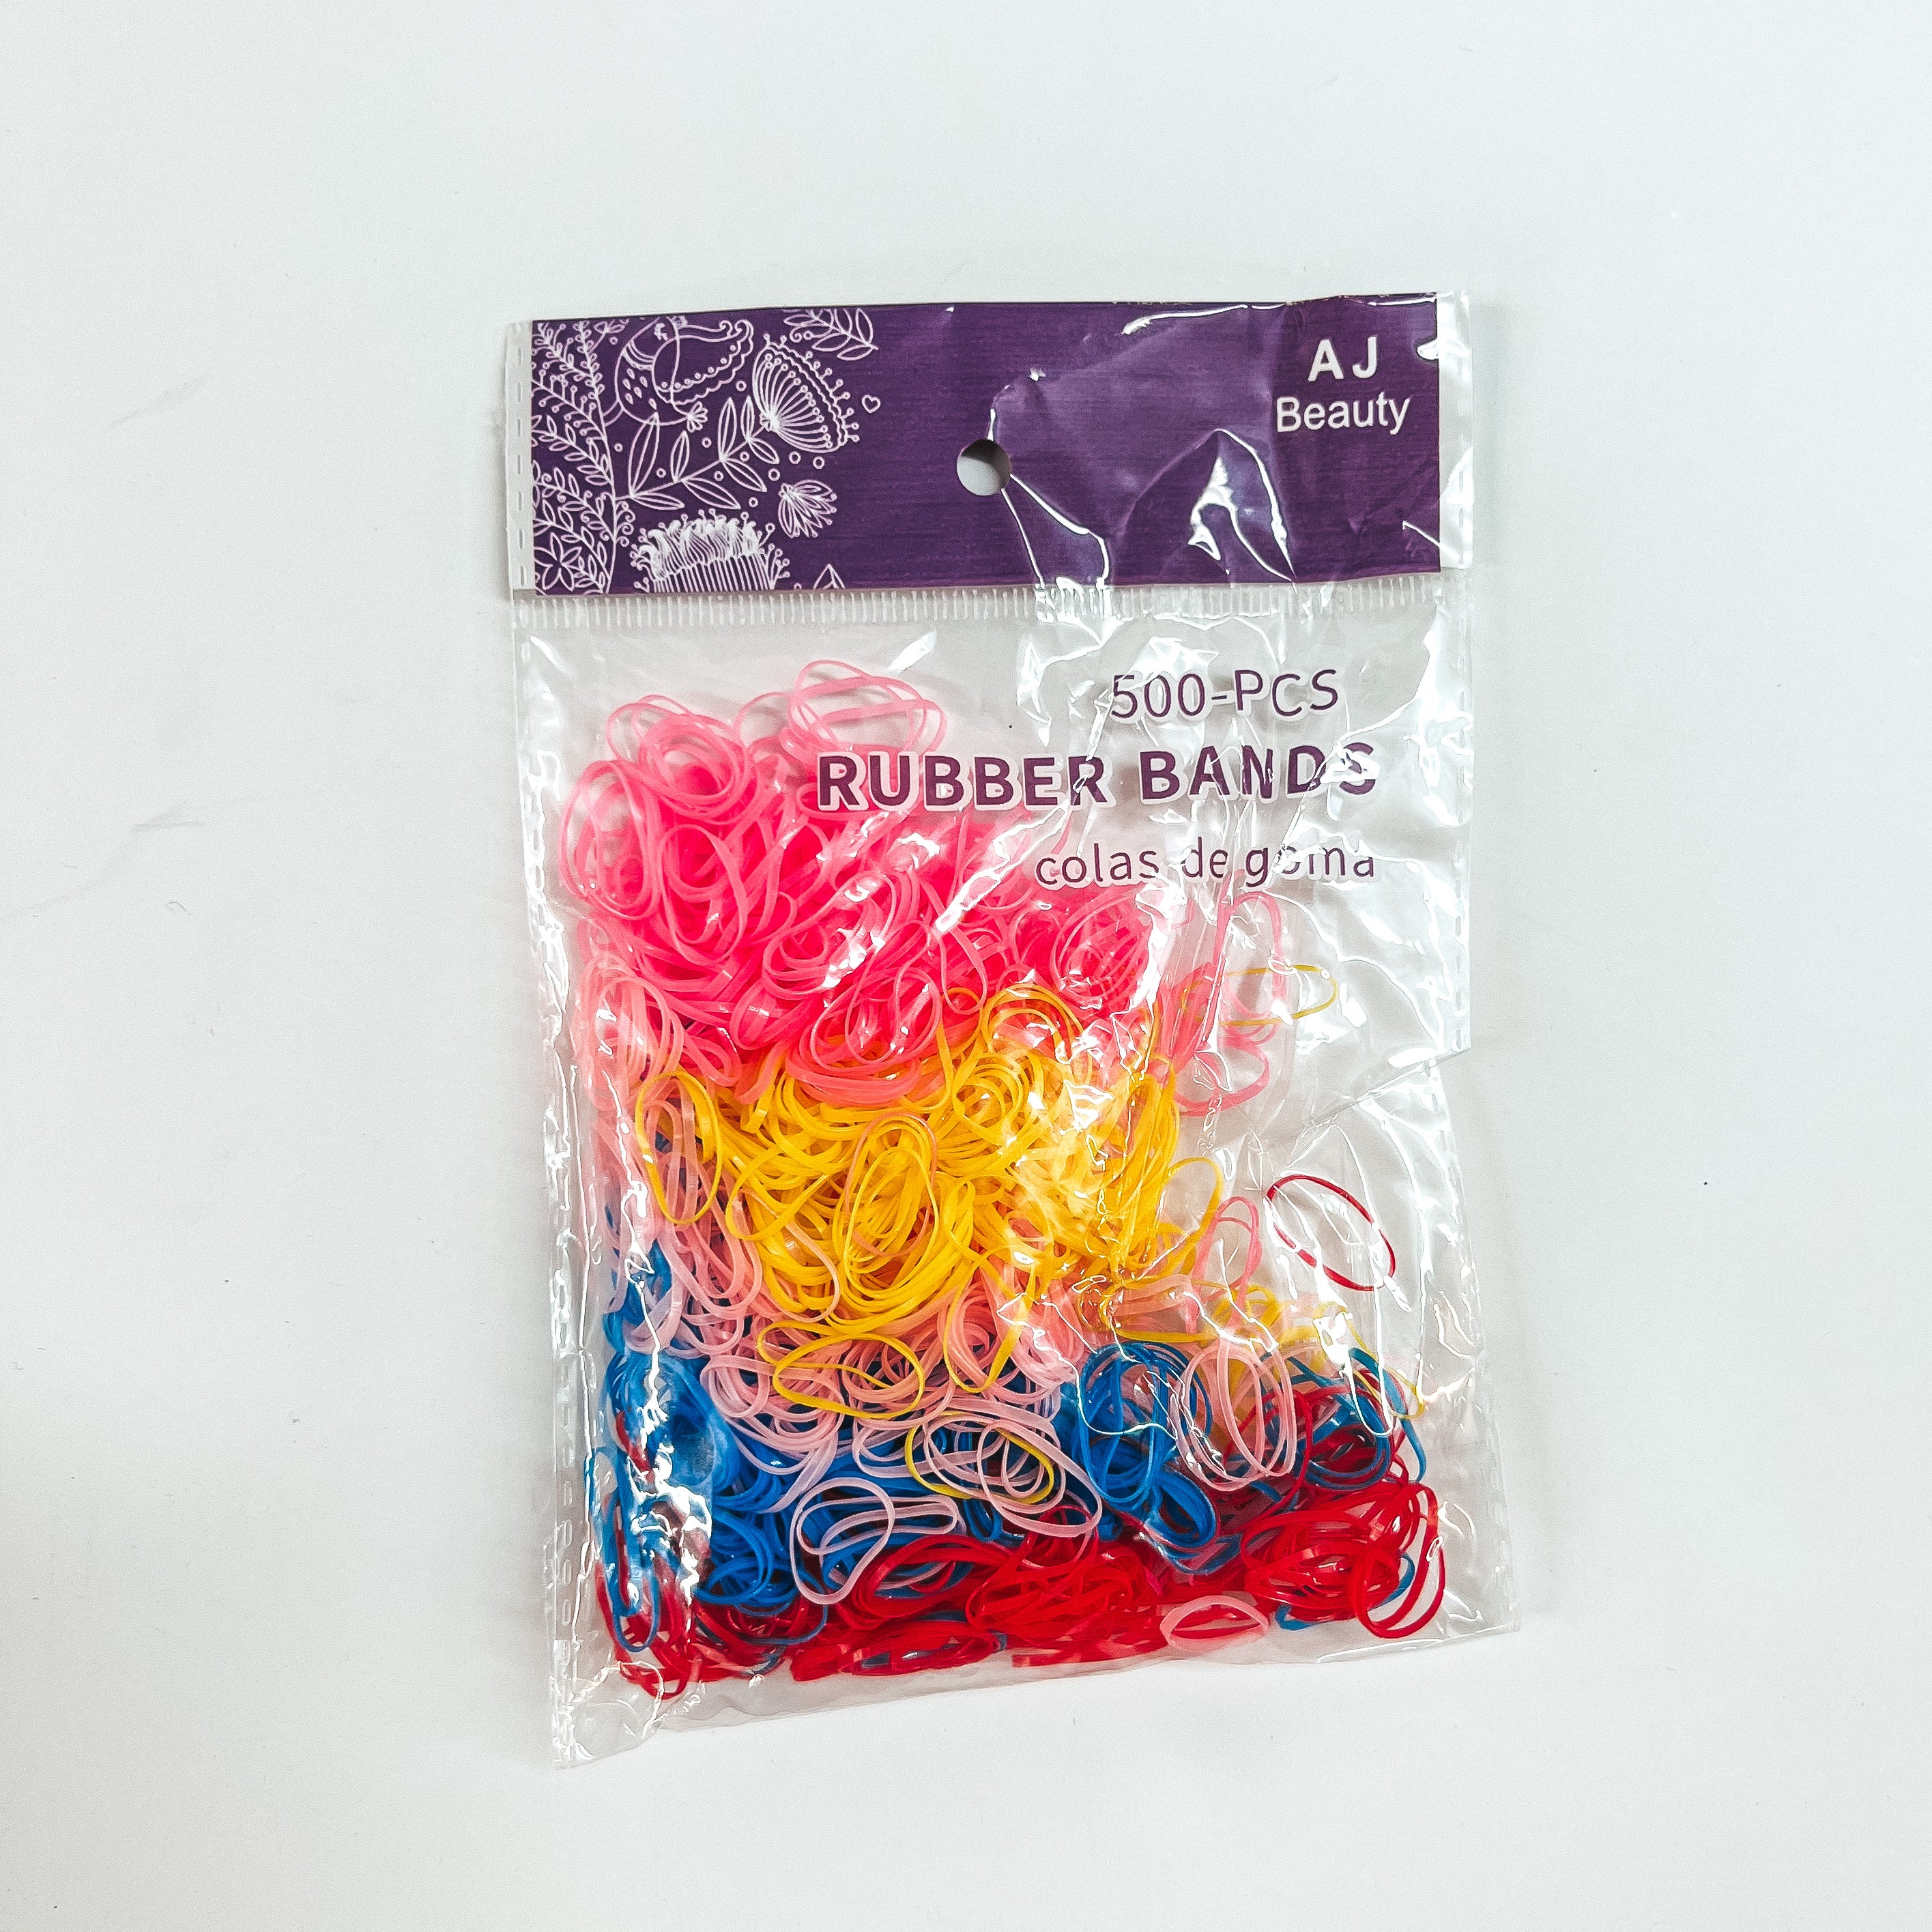 This is a pack of 500 small rubber bands in different colors such as yellow,  pink, blue, red, and light pink.  This clear and purple pack is taken on a white background.